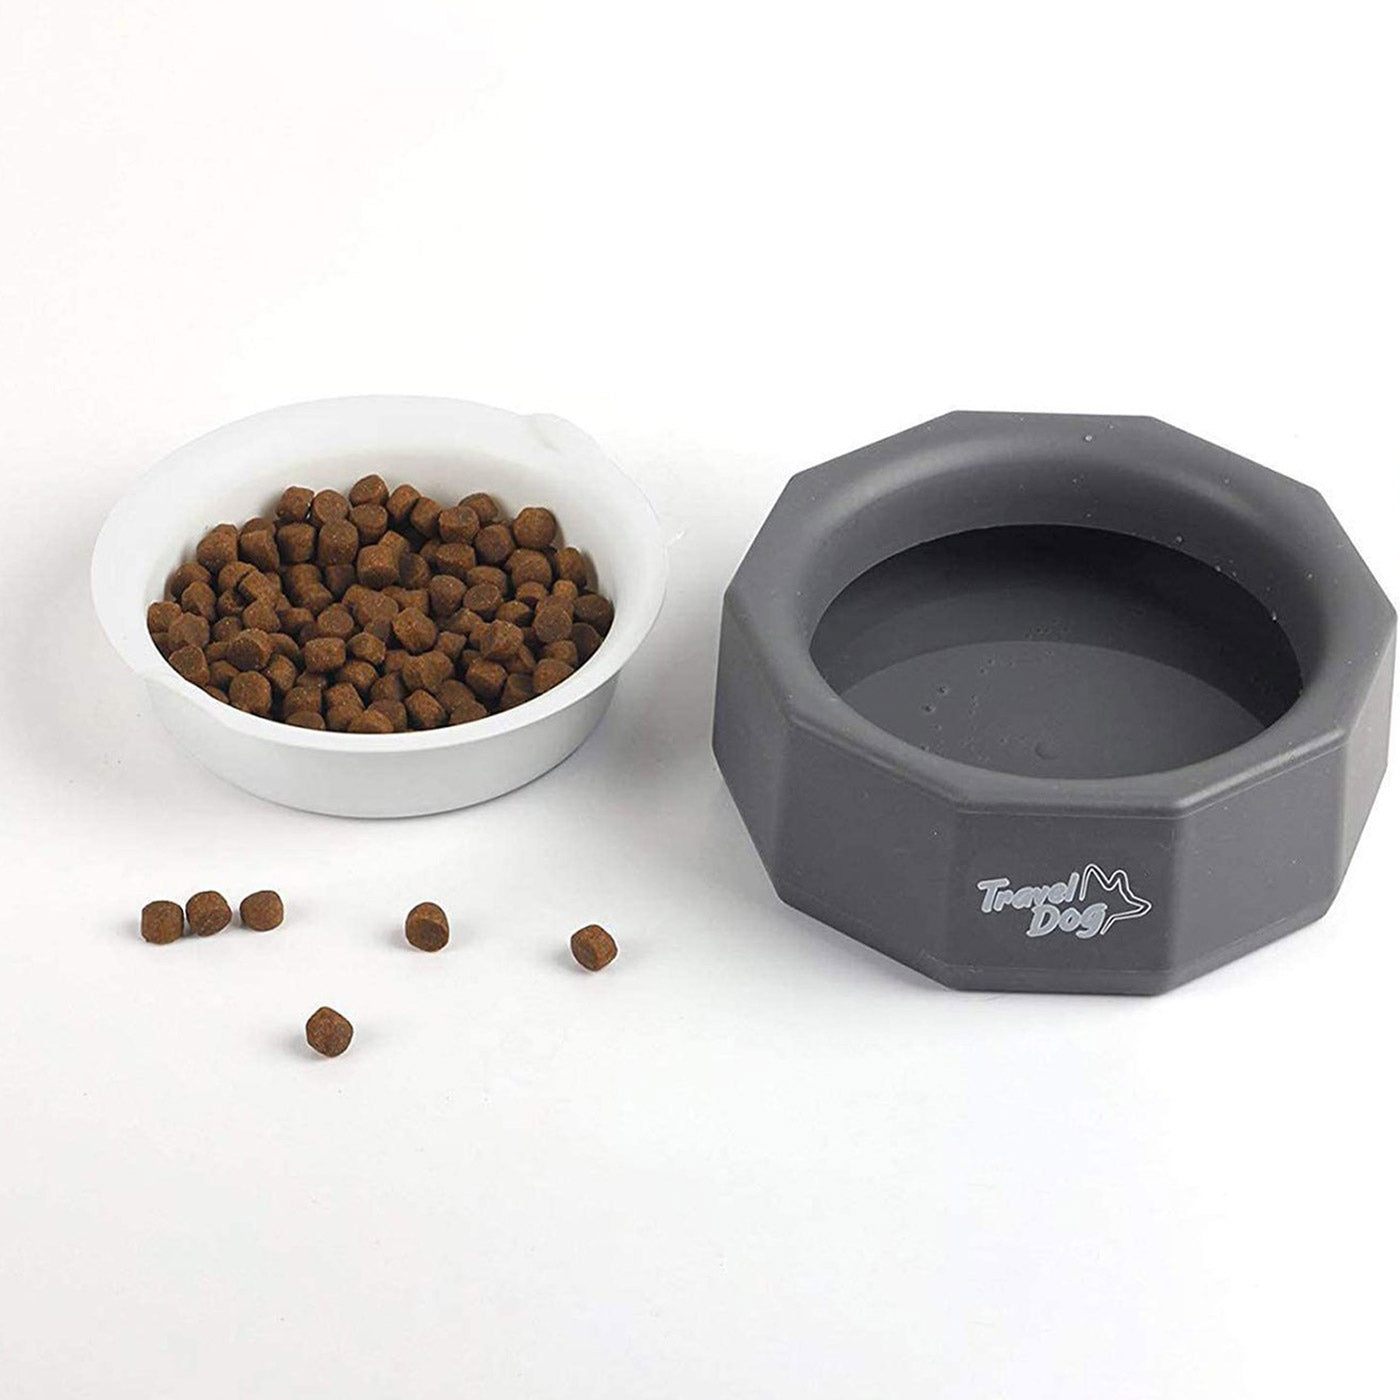 All For Paws Travel 2 In 1 Non Spill Bowl